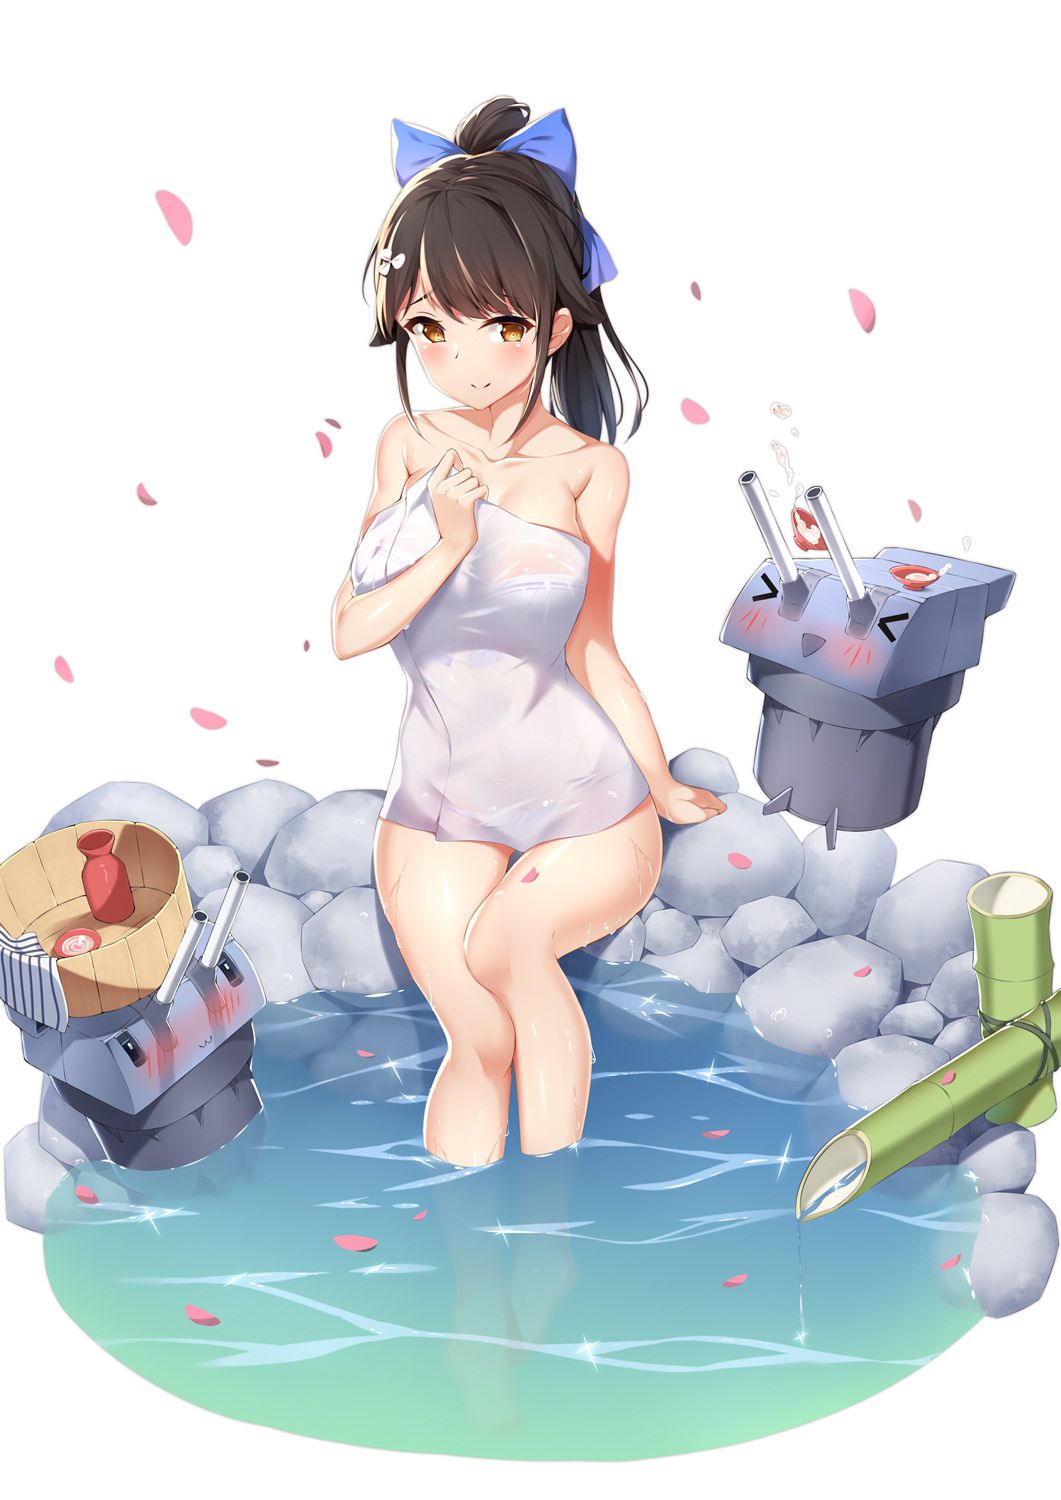 [Erotic anime summary] collection of images of beautiful girls and beautiful girls who are exposing nasty bodies in the bath [50 sheets] 22